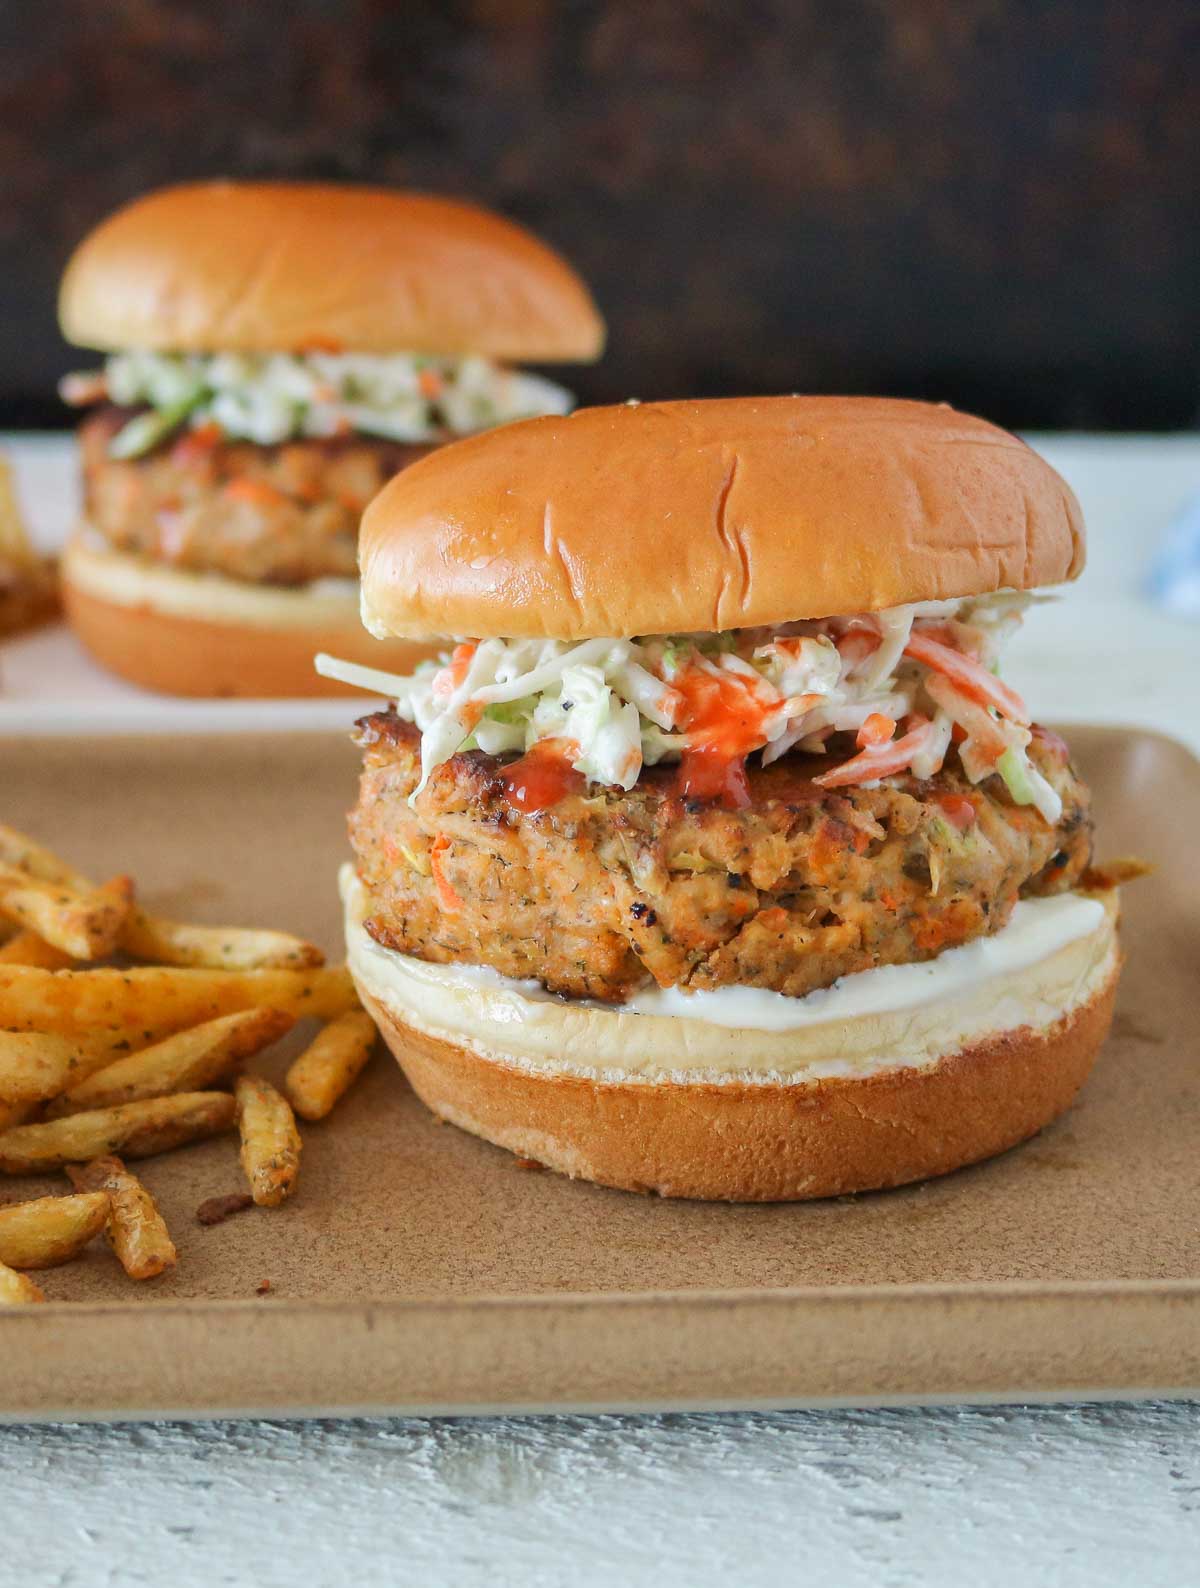 Two buffalo chicken burgers and fries, each on a plate, one plate in front of the other.